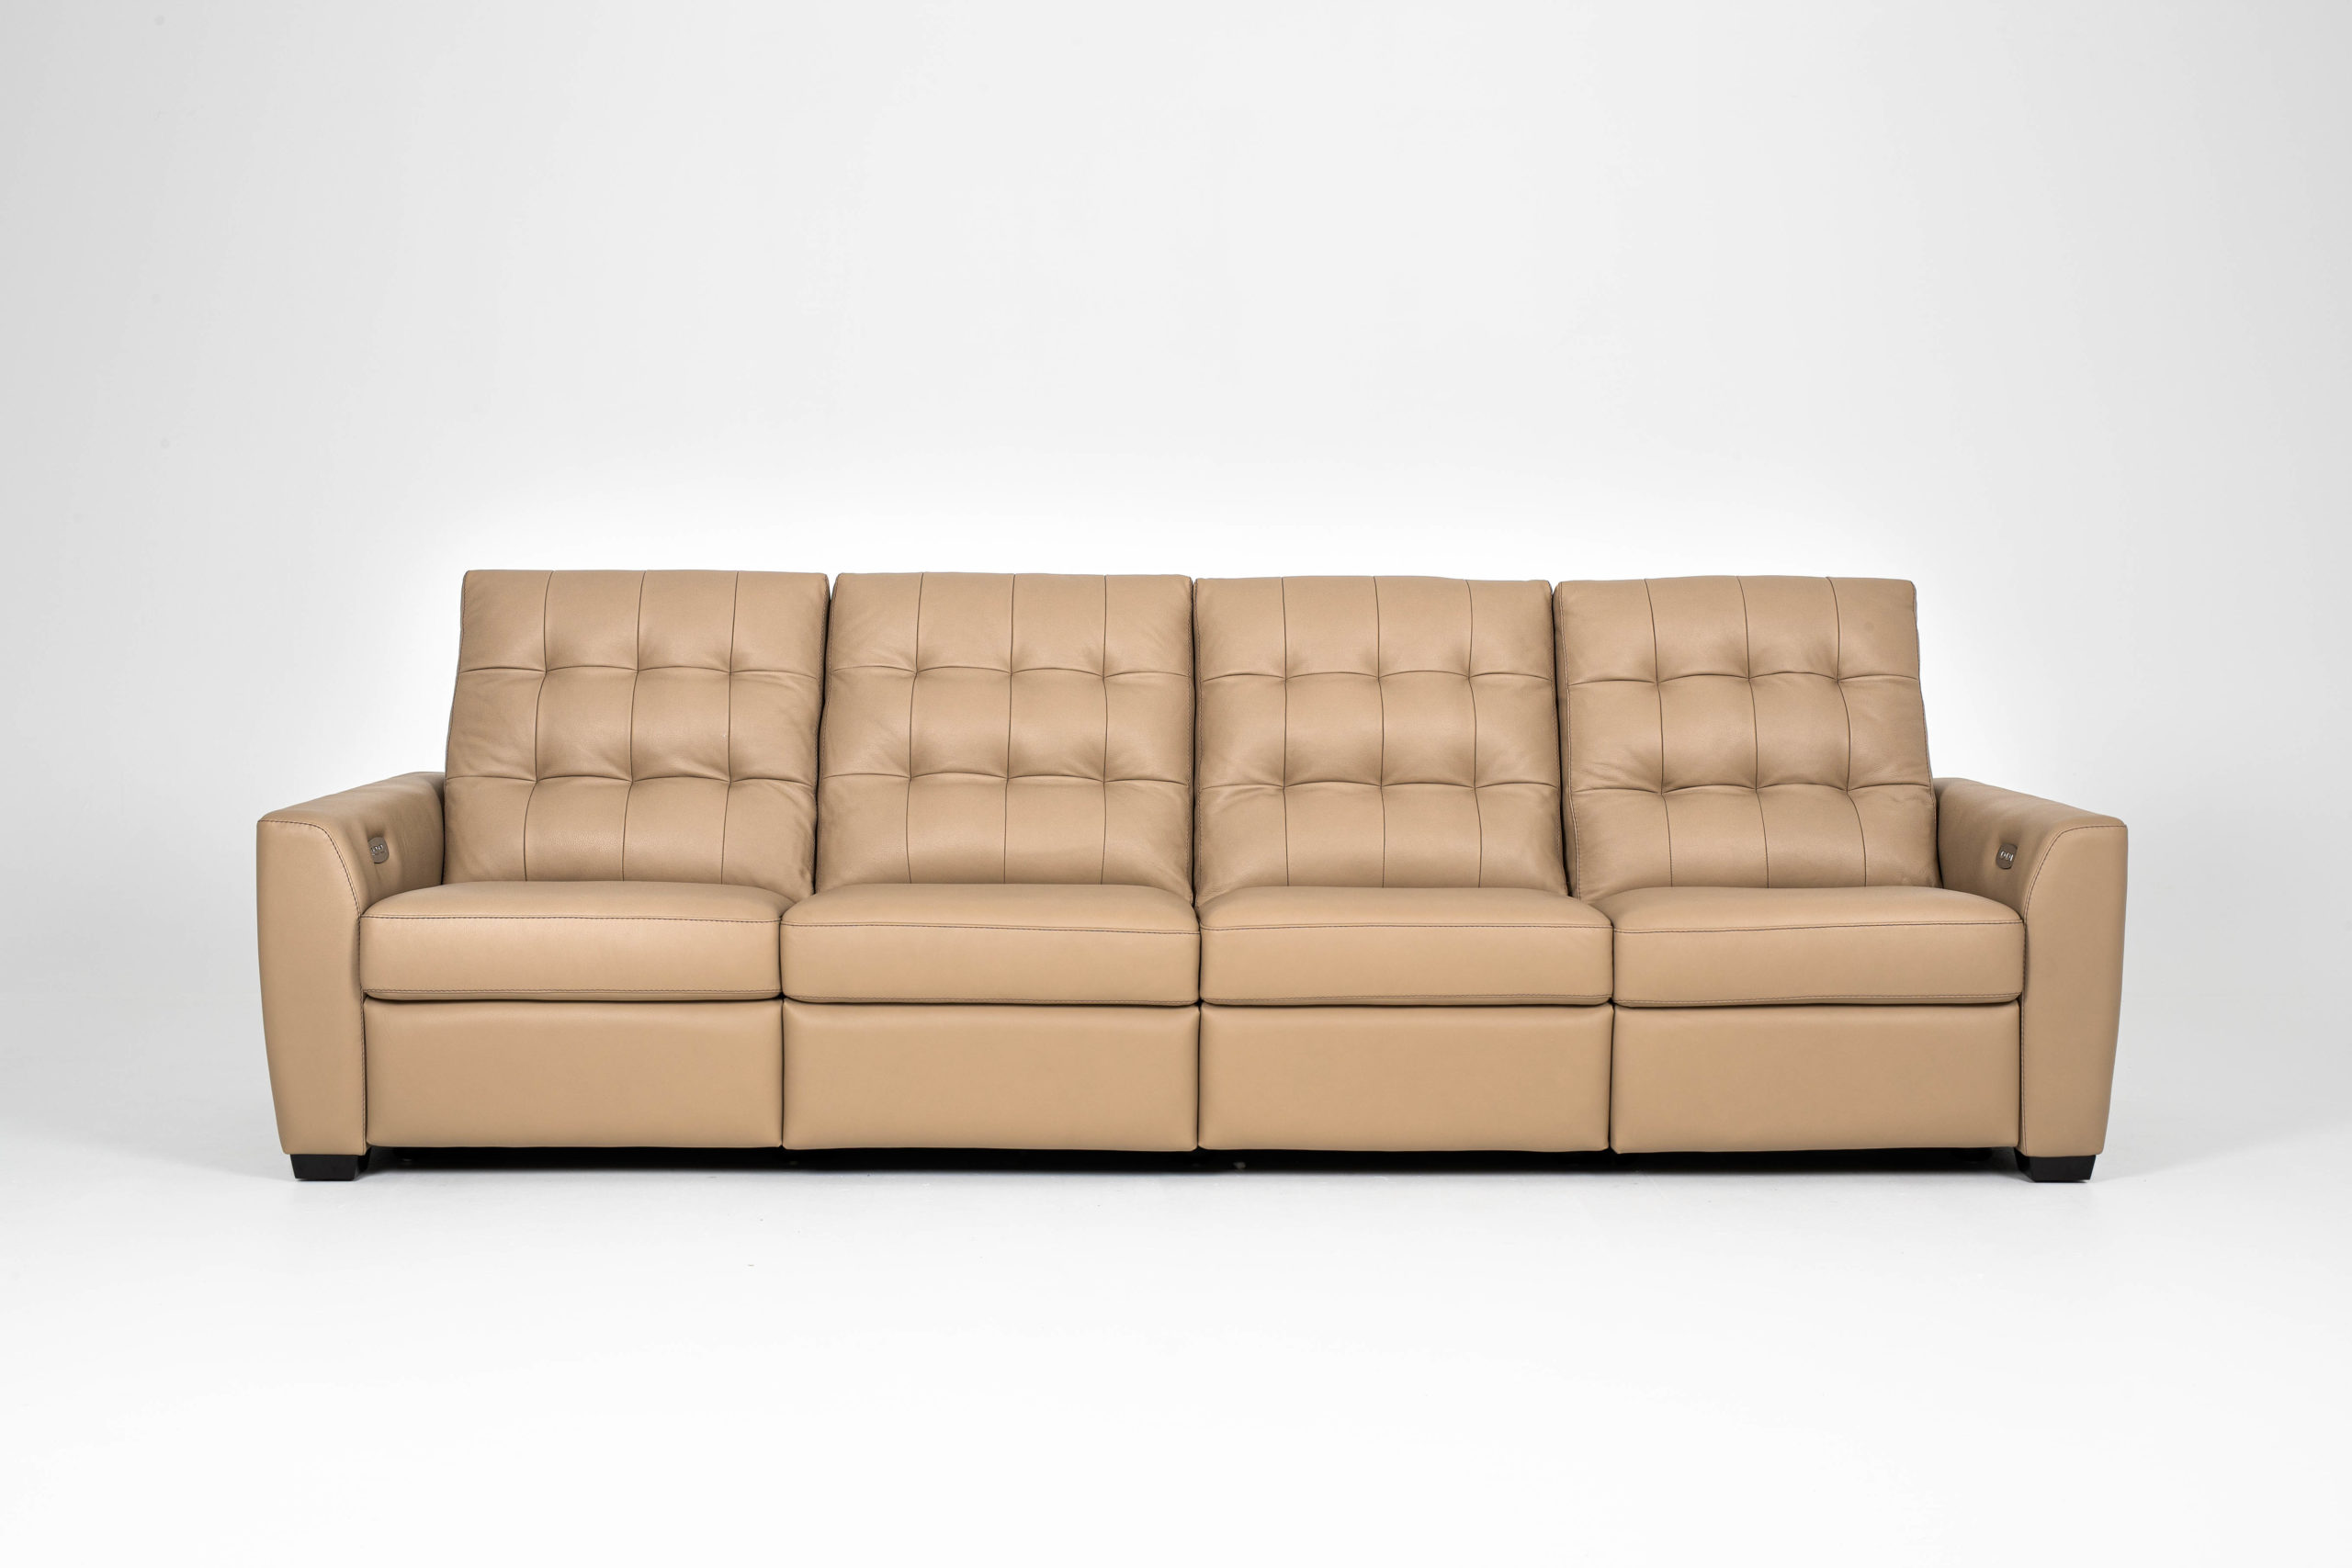 4 seat leather sofa with chaise